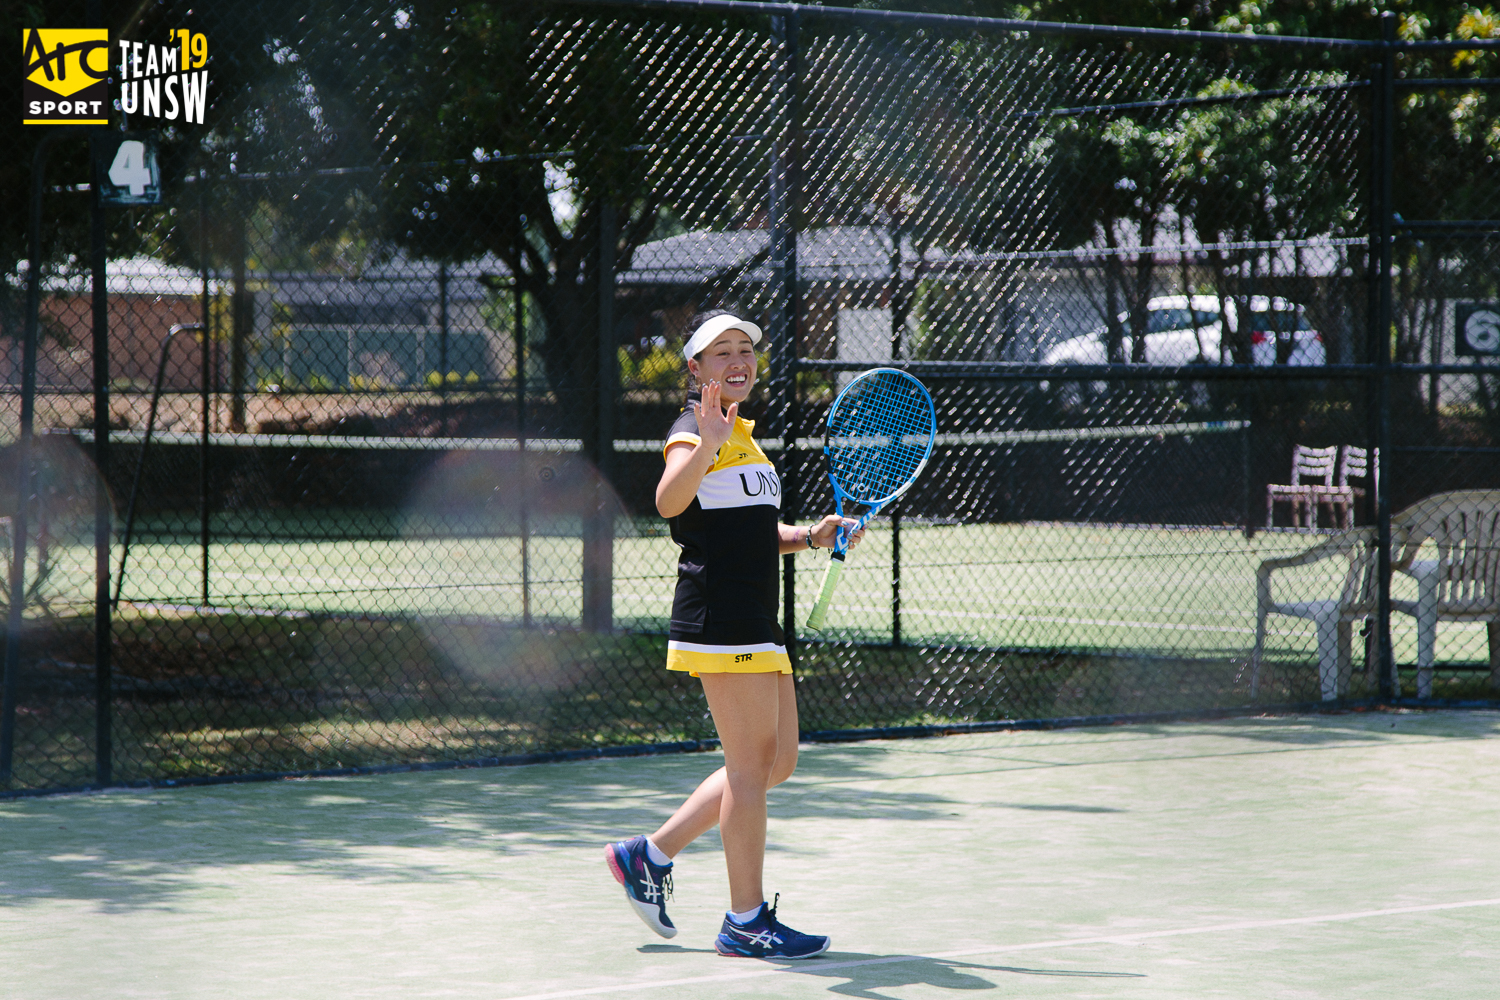 Student in UNSW tennis uniform waving at the camera